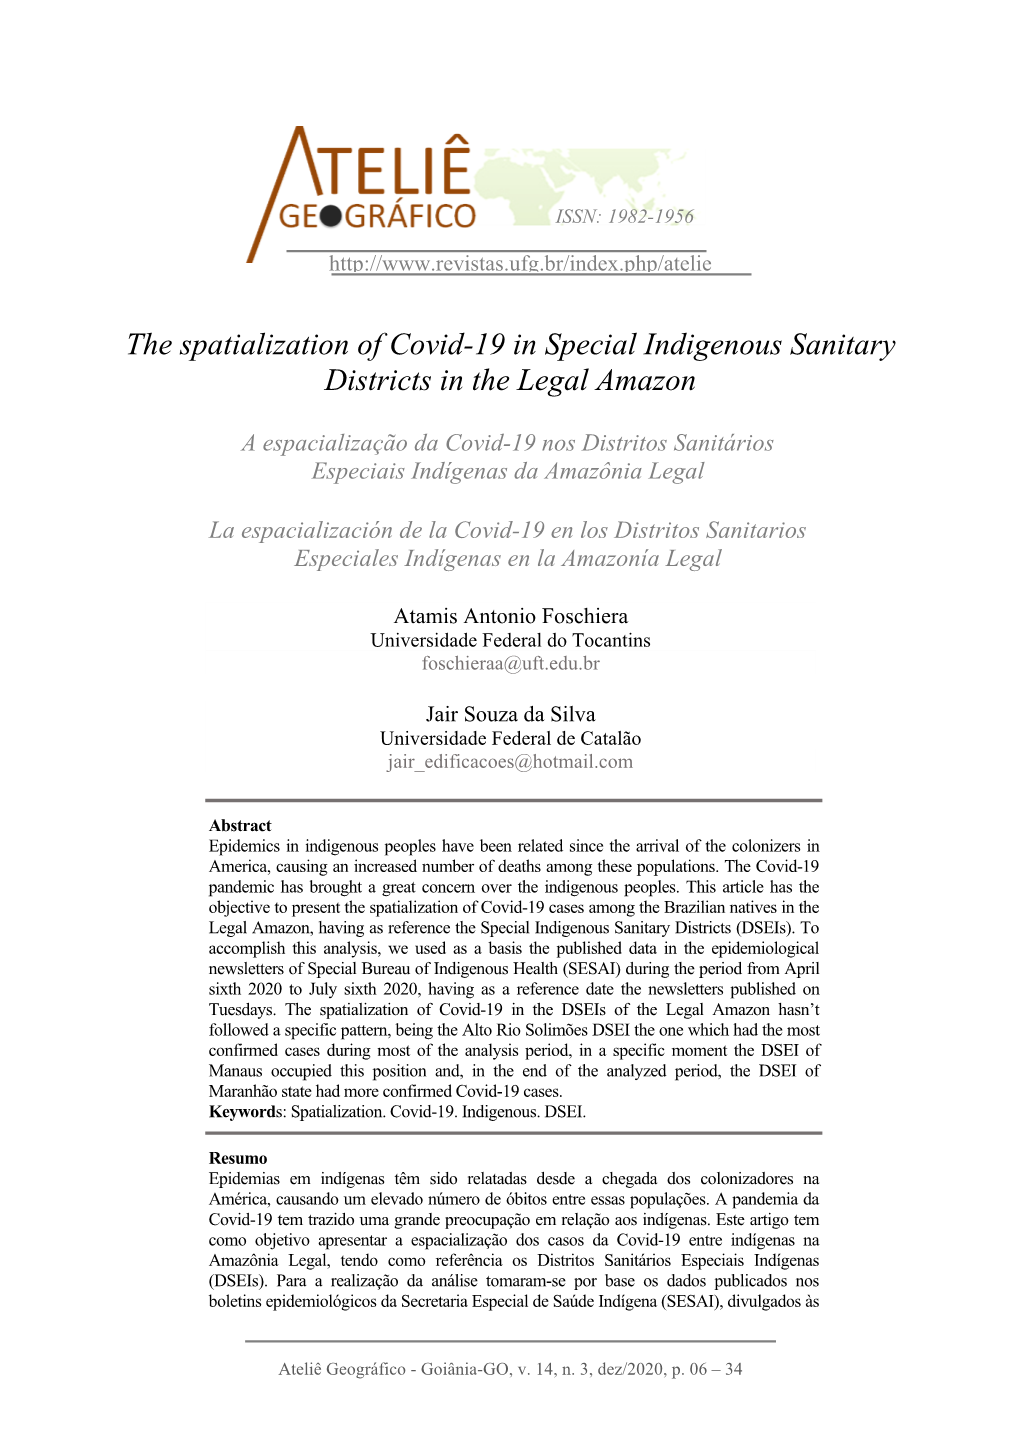 The Spatialization of Covid-19 in Special Indigenous Sanitary Districts in the Legal Amazon